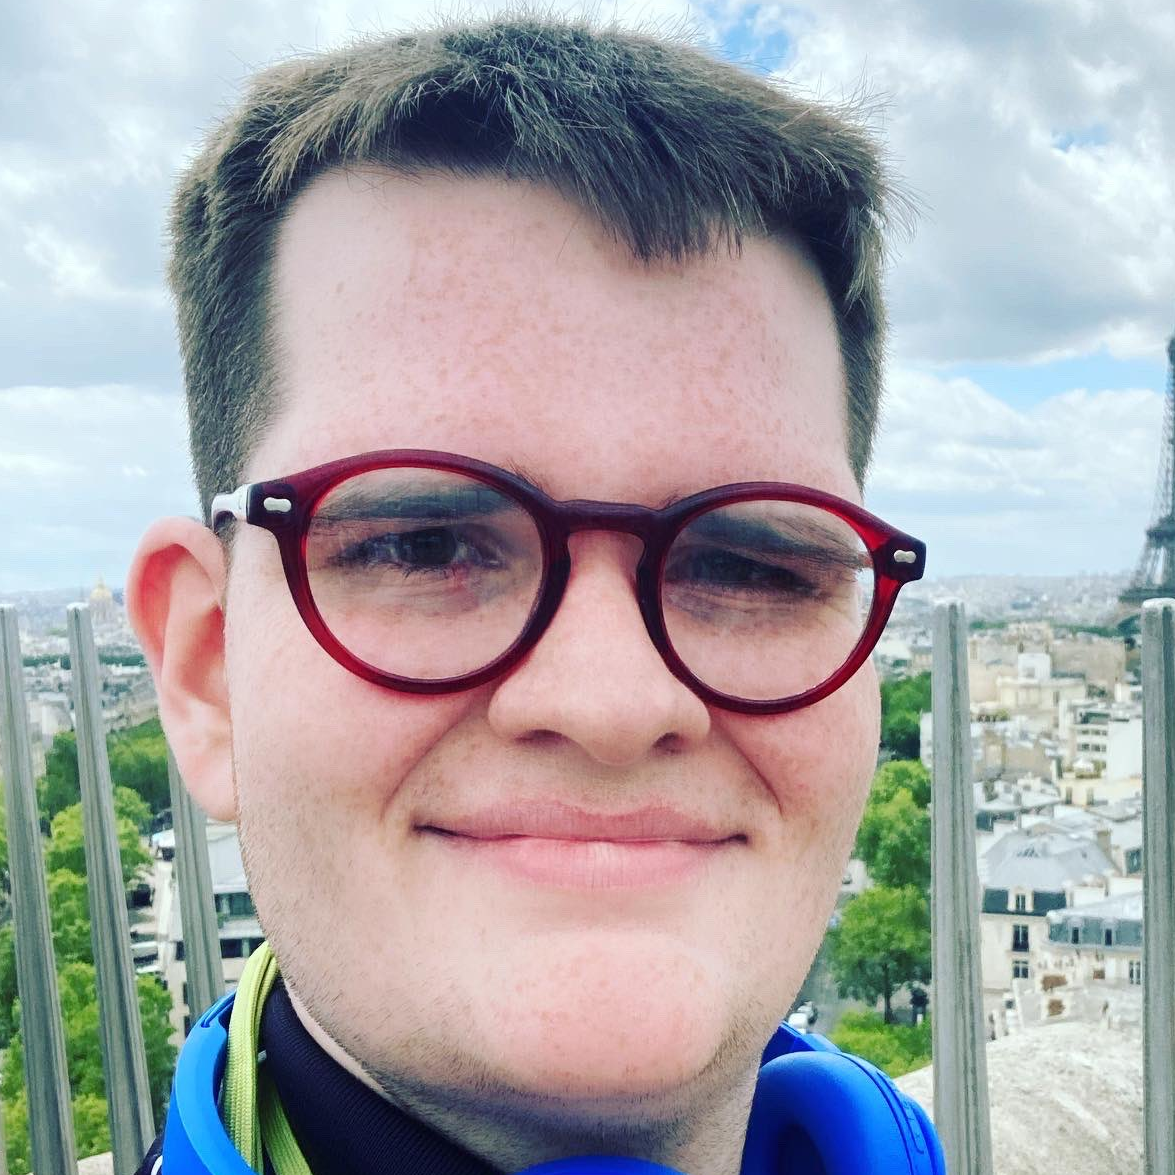 Headshot of young man with pale skin, brown hair, and wearing red glasses and blue headsets around his neck. He is standing in front of the Eiffel Tower. 